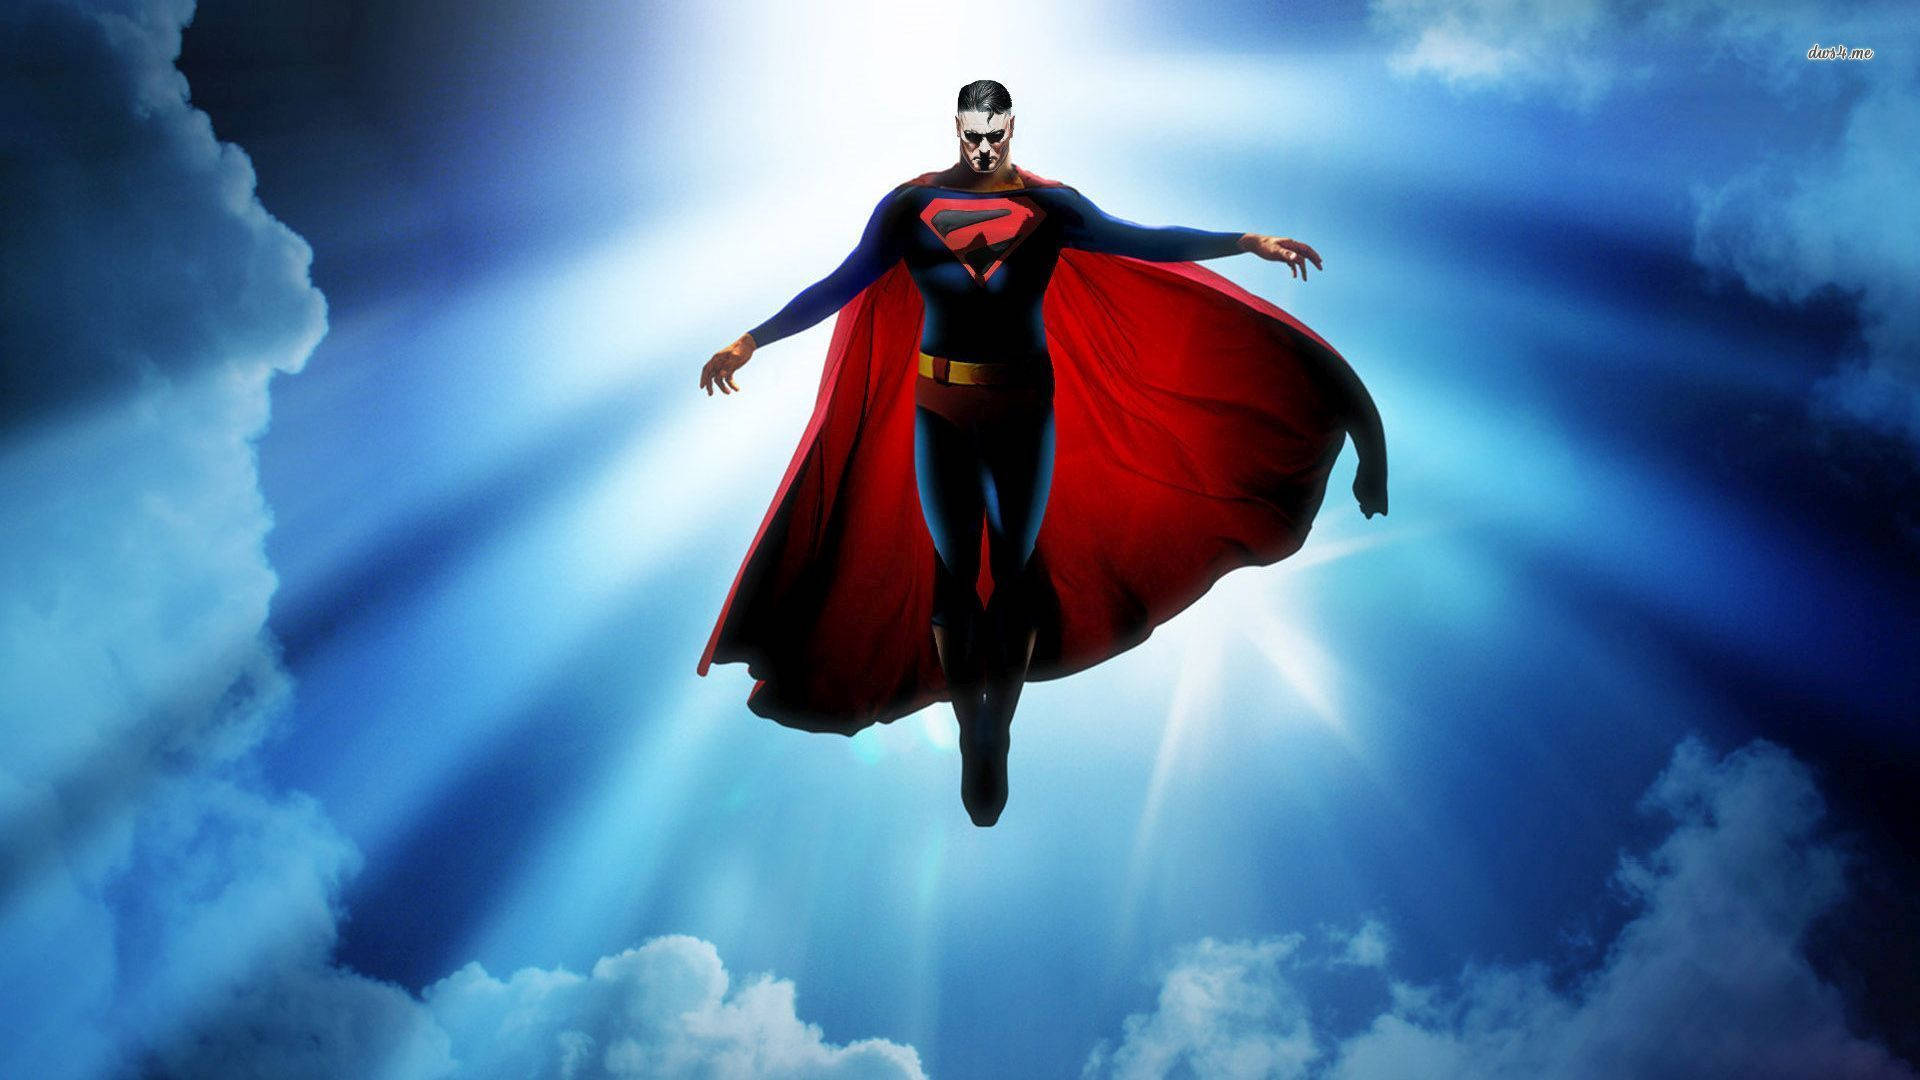 Superman Flying In The Sky With Clouds Background